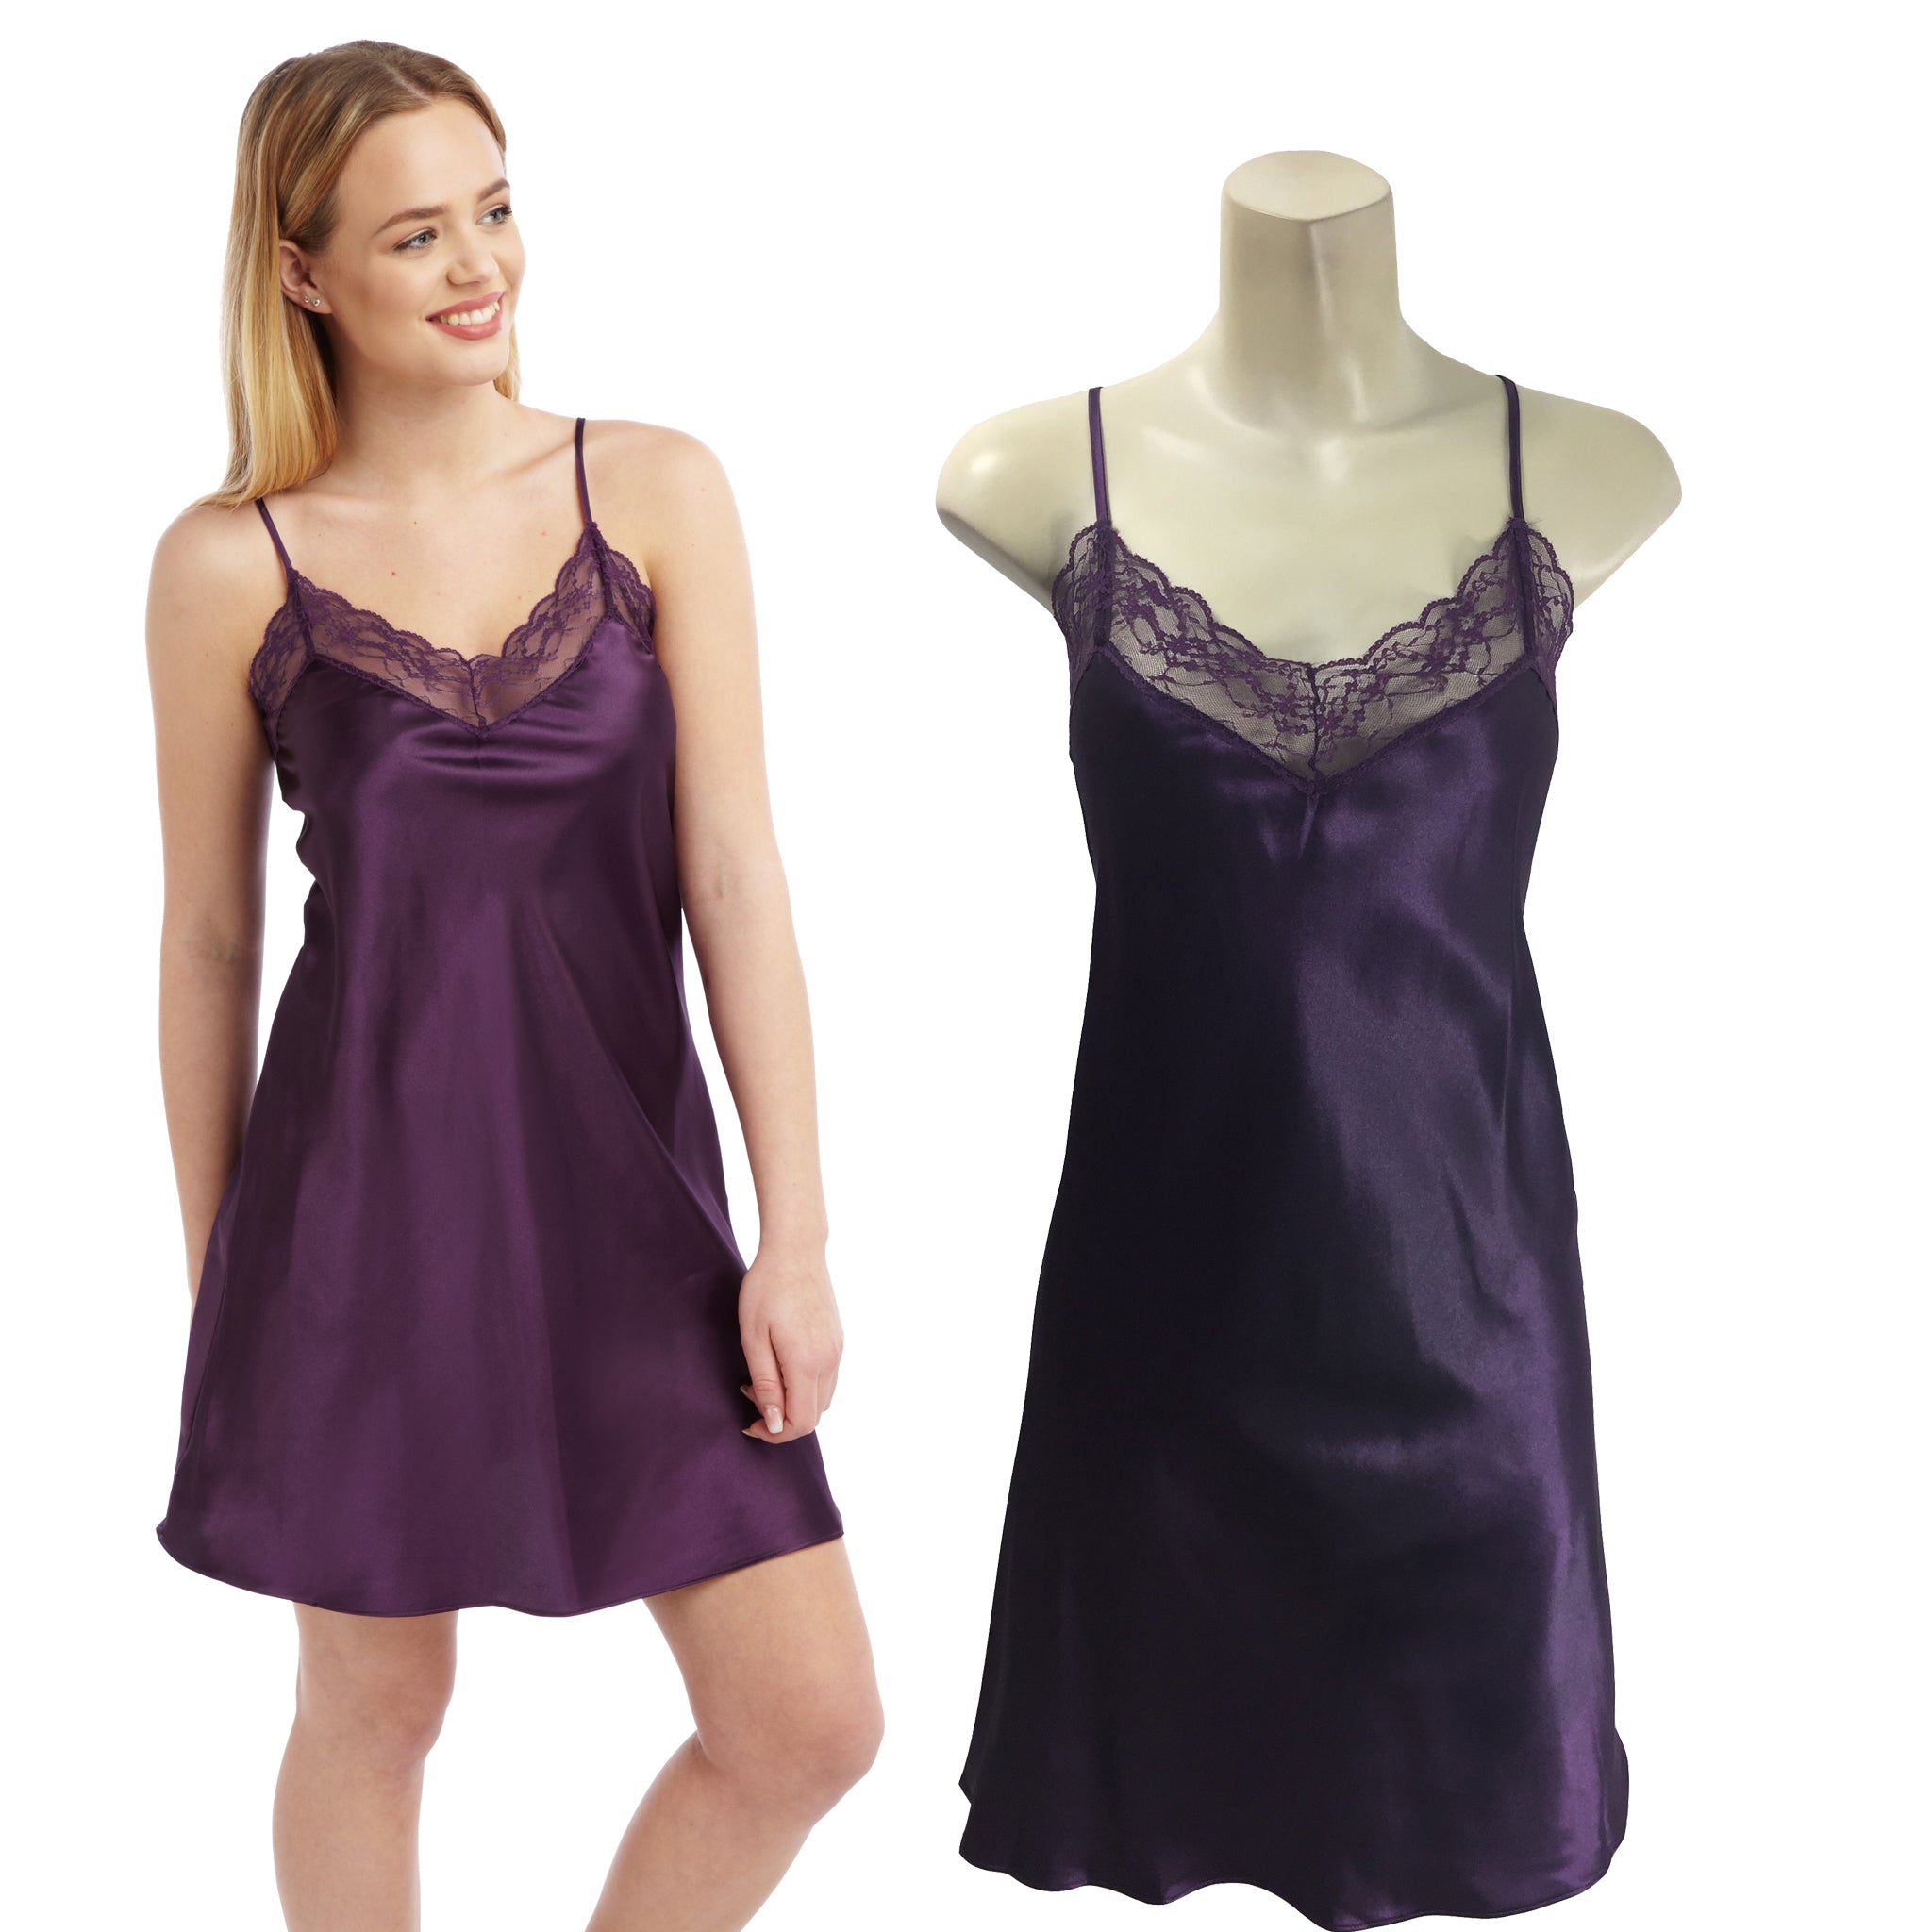 https://justforyouboutique.co.uk/cdn/shop/files/ladies-sexy-silky-satin-lace-purple-chemise-nightie-plus-size-12-14-16-18-20-22-24-26-28-30-32-just-for-you-boutique.jpg?v=1686478444